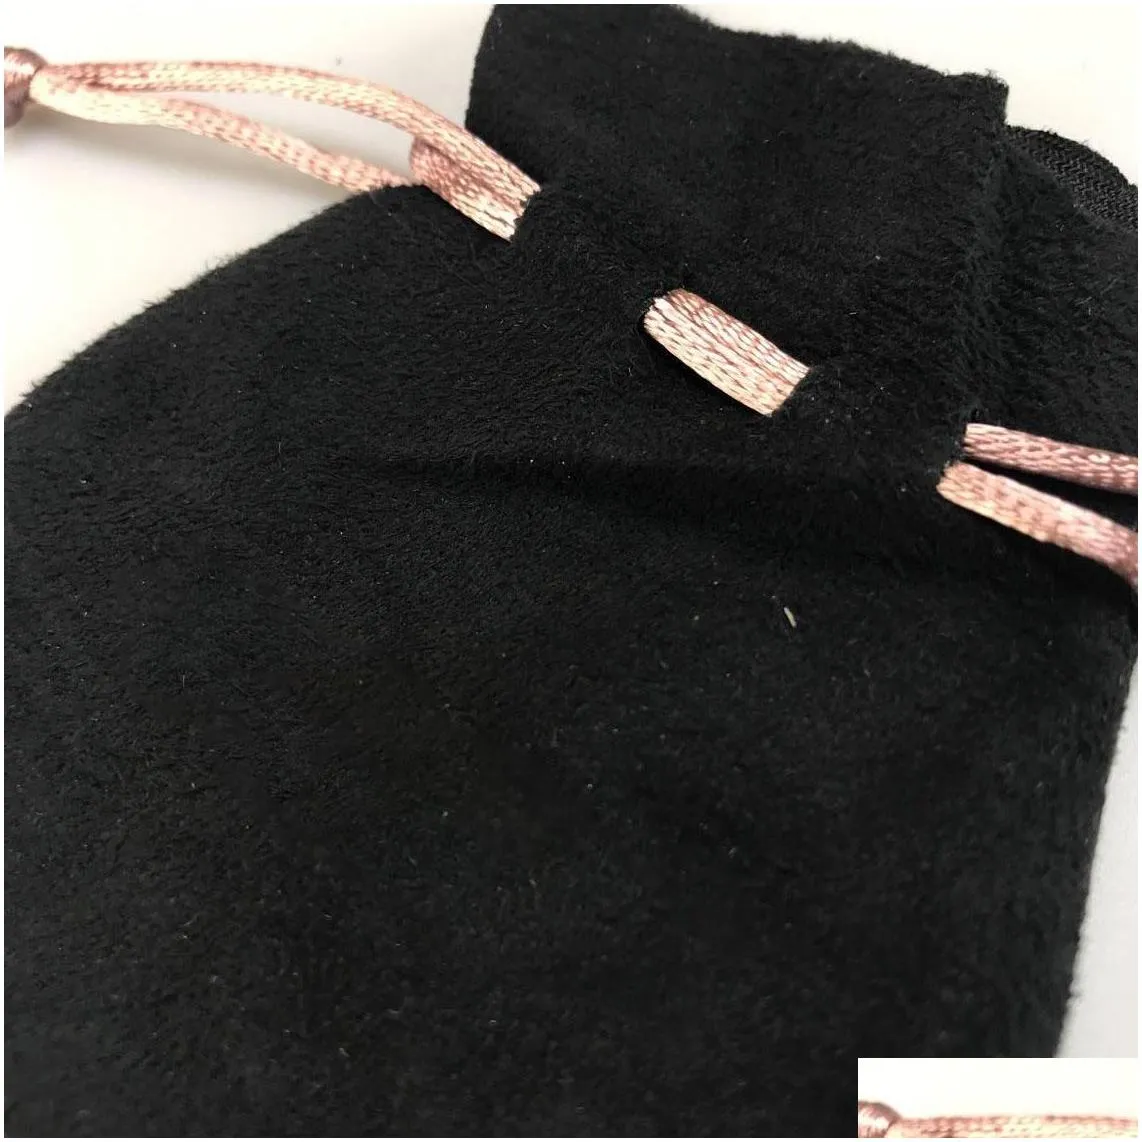 black velvet bags fits european jewelry style beads charms and bracelets necklaces jewelry fashion pendant pouches